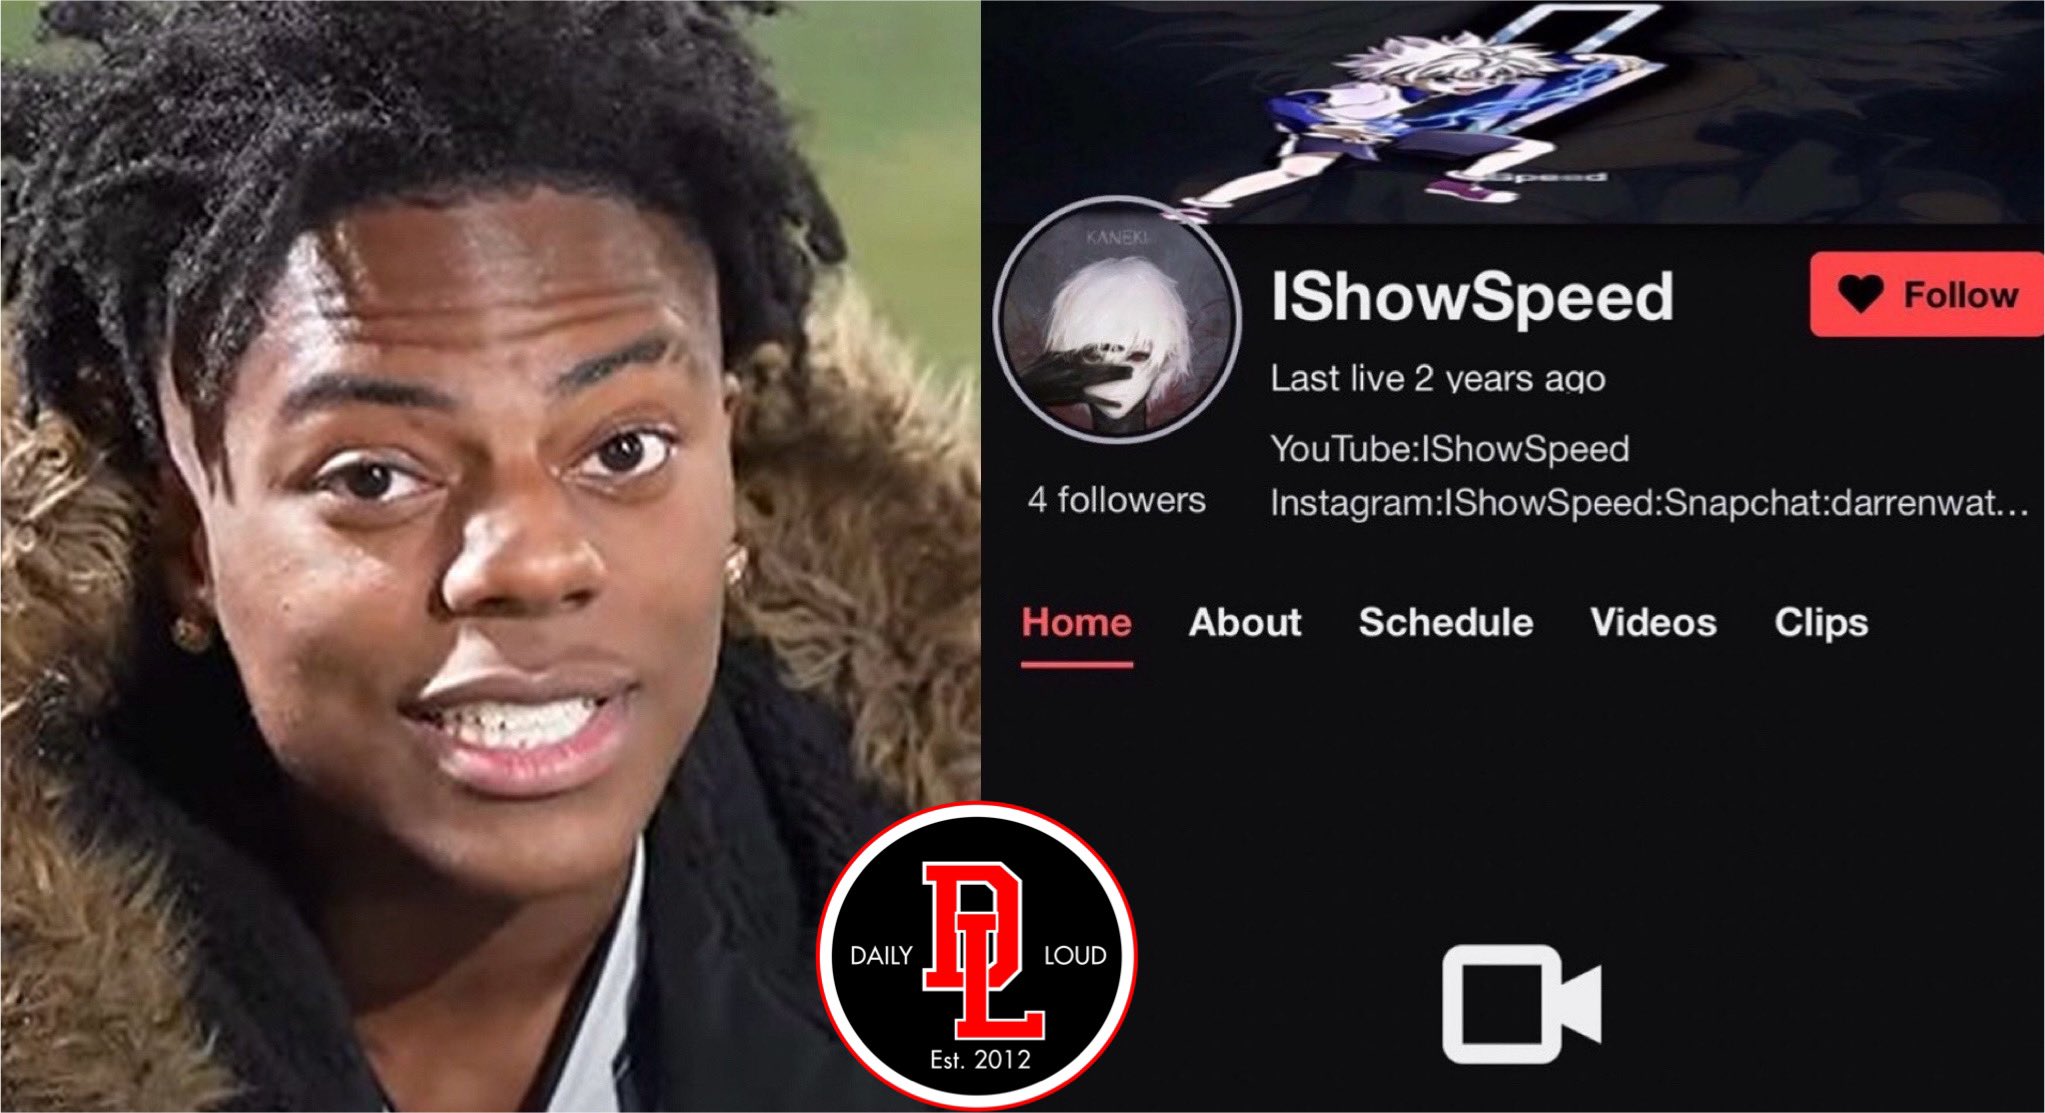 I Am Literally Unbanned on Twitch” – IShowSpeed Gets Unbanned on